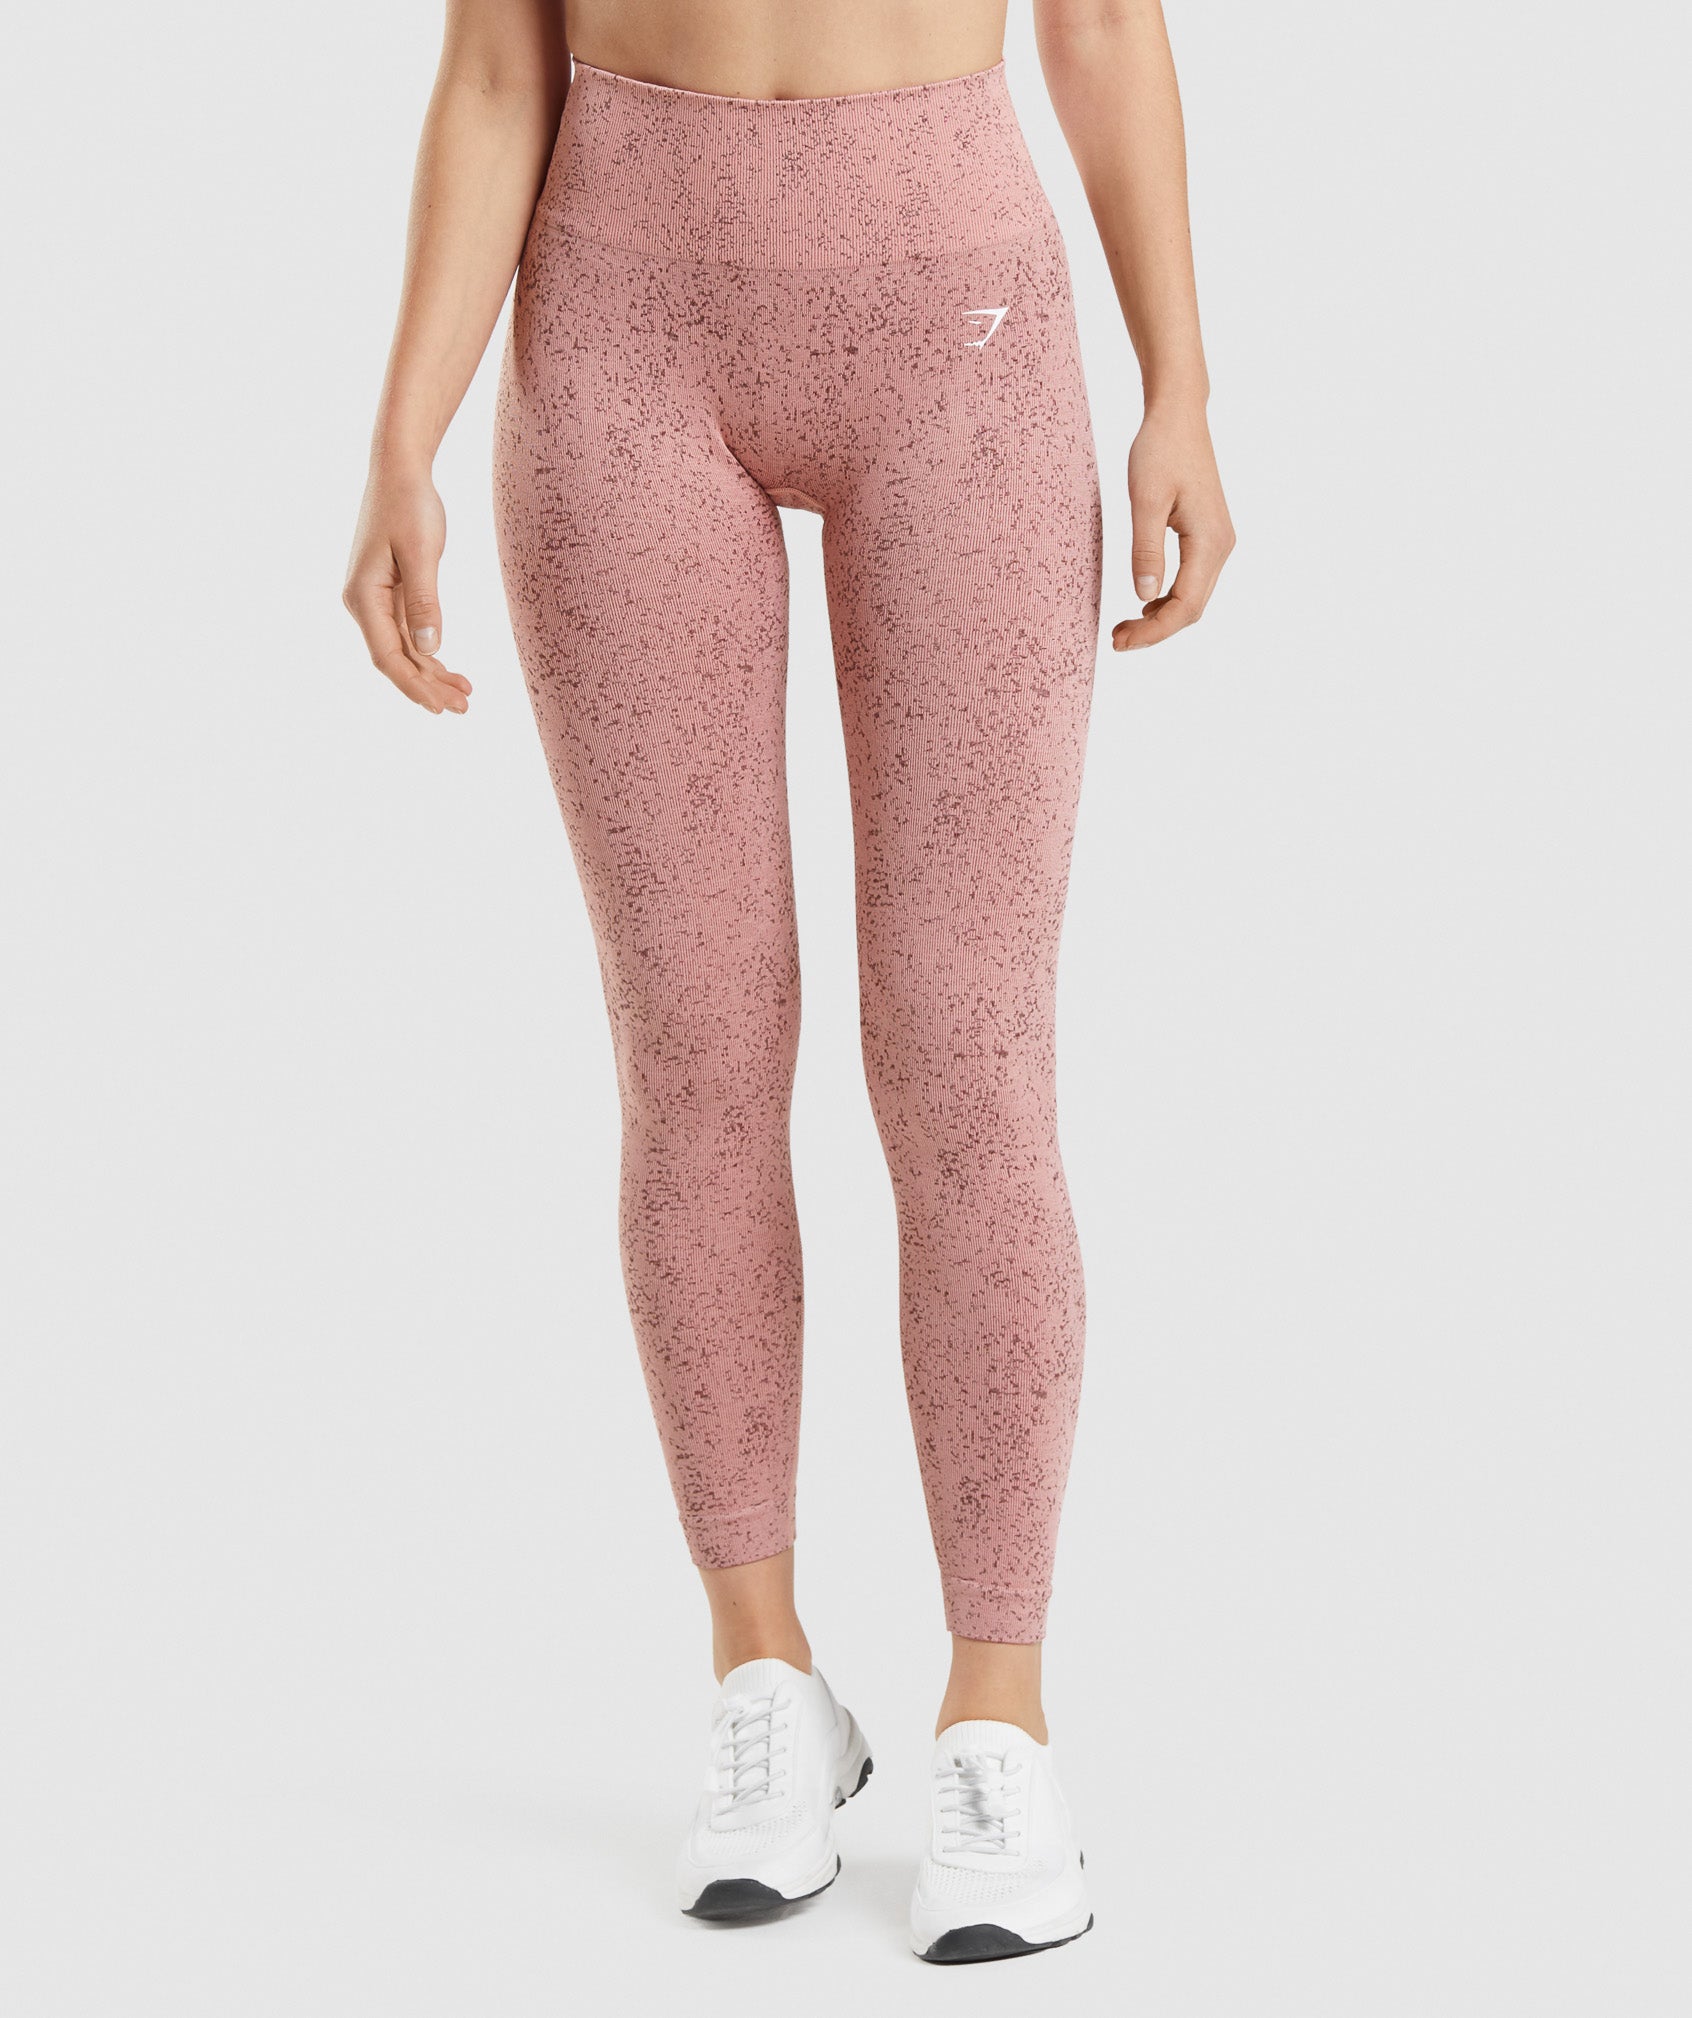 Adapt Fleck Seamless Leggings in Mineral | Paige Pink - view 1